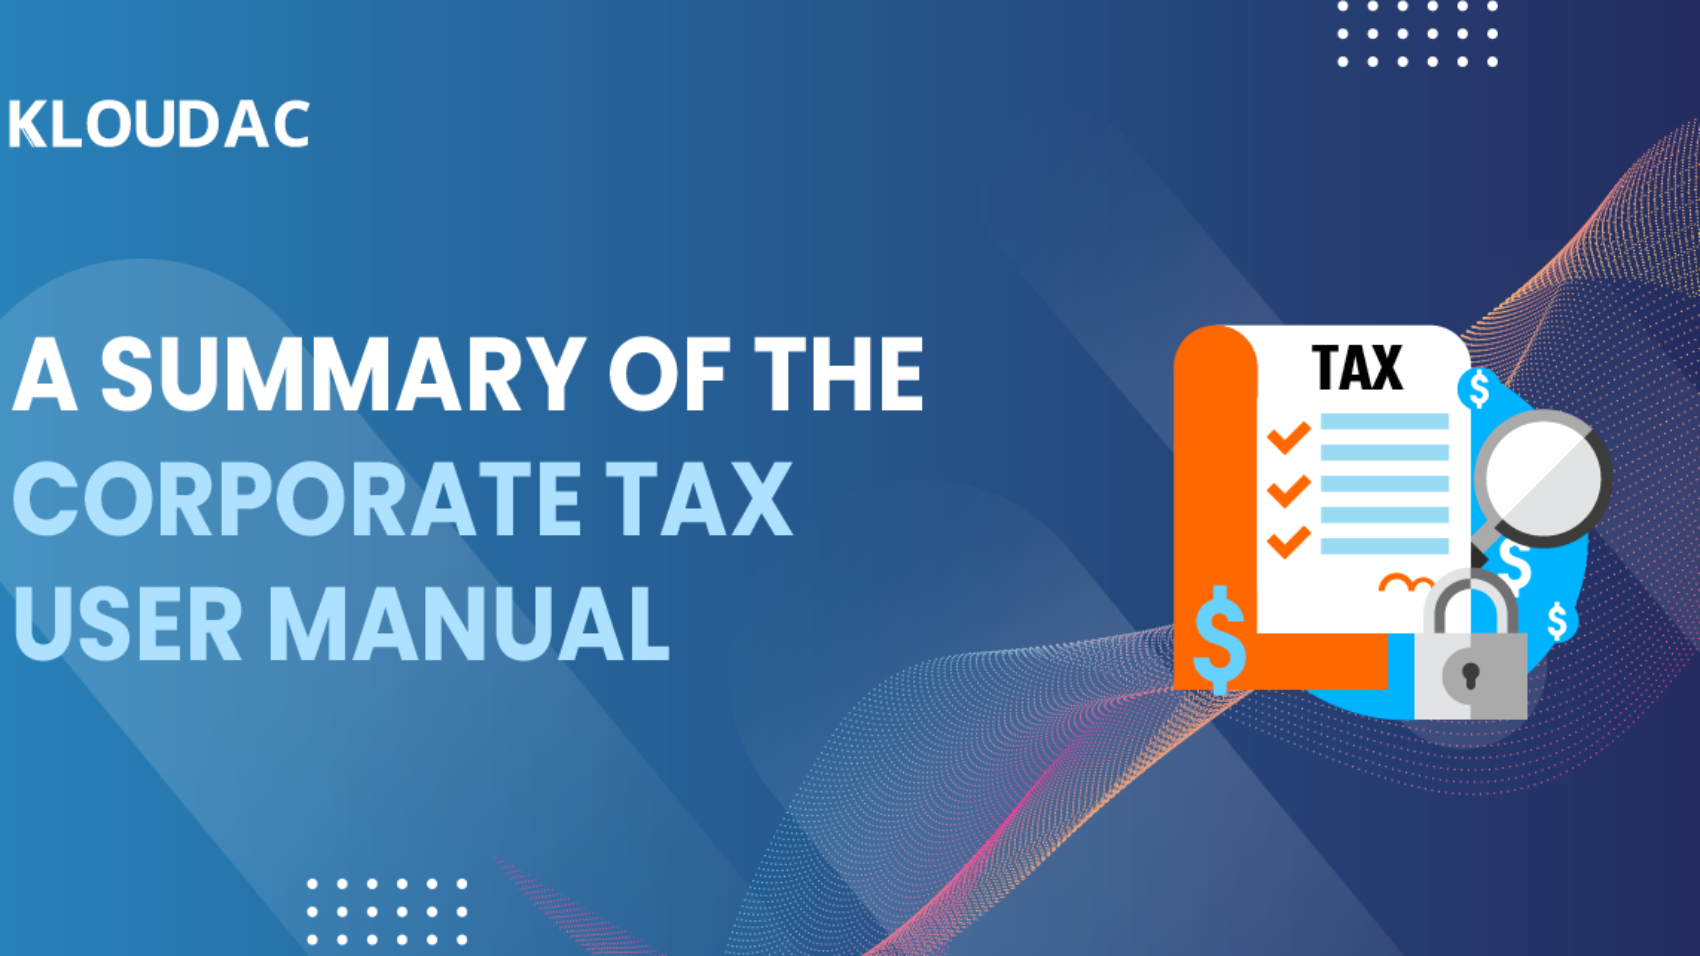 A summary of the Corporate Tax user manual